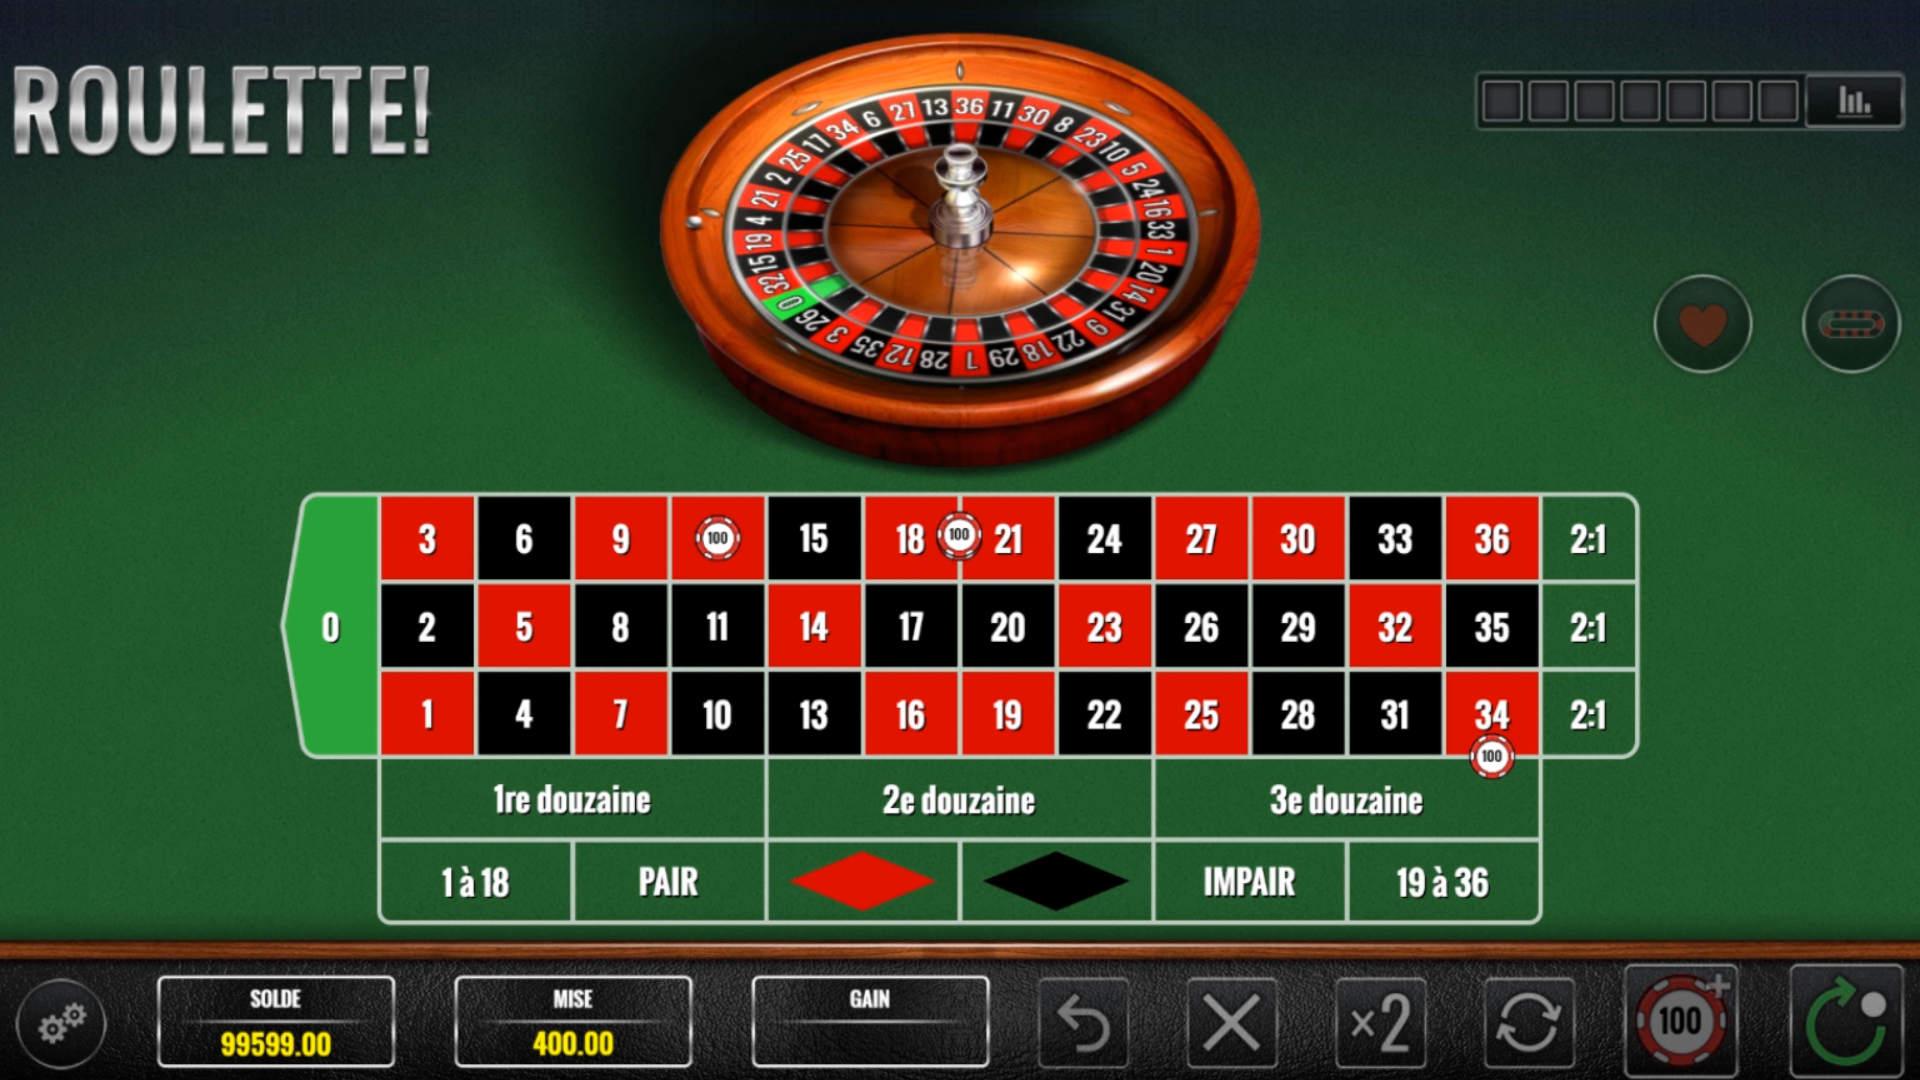 Roulette! carousel image 1